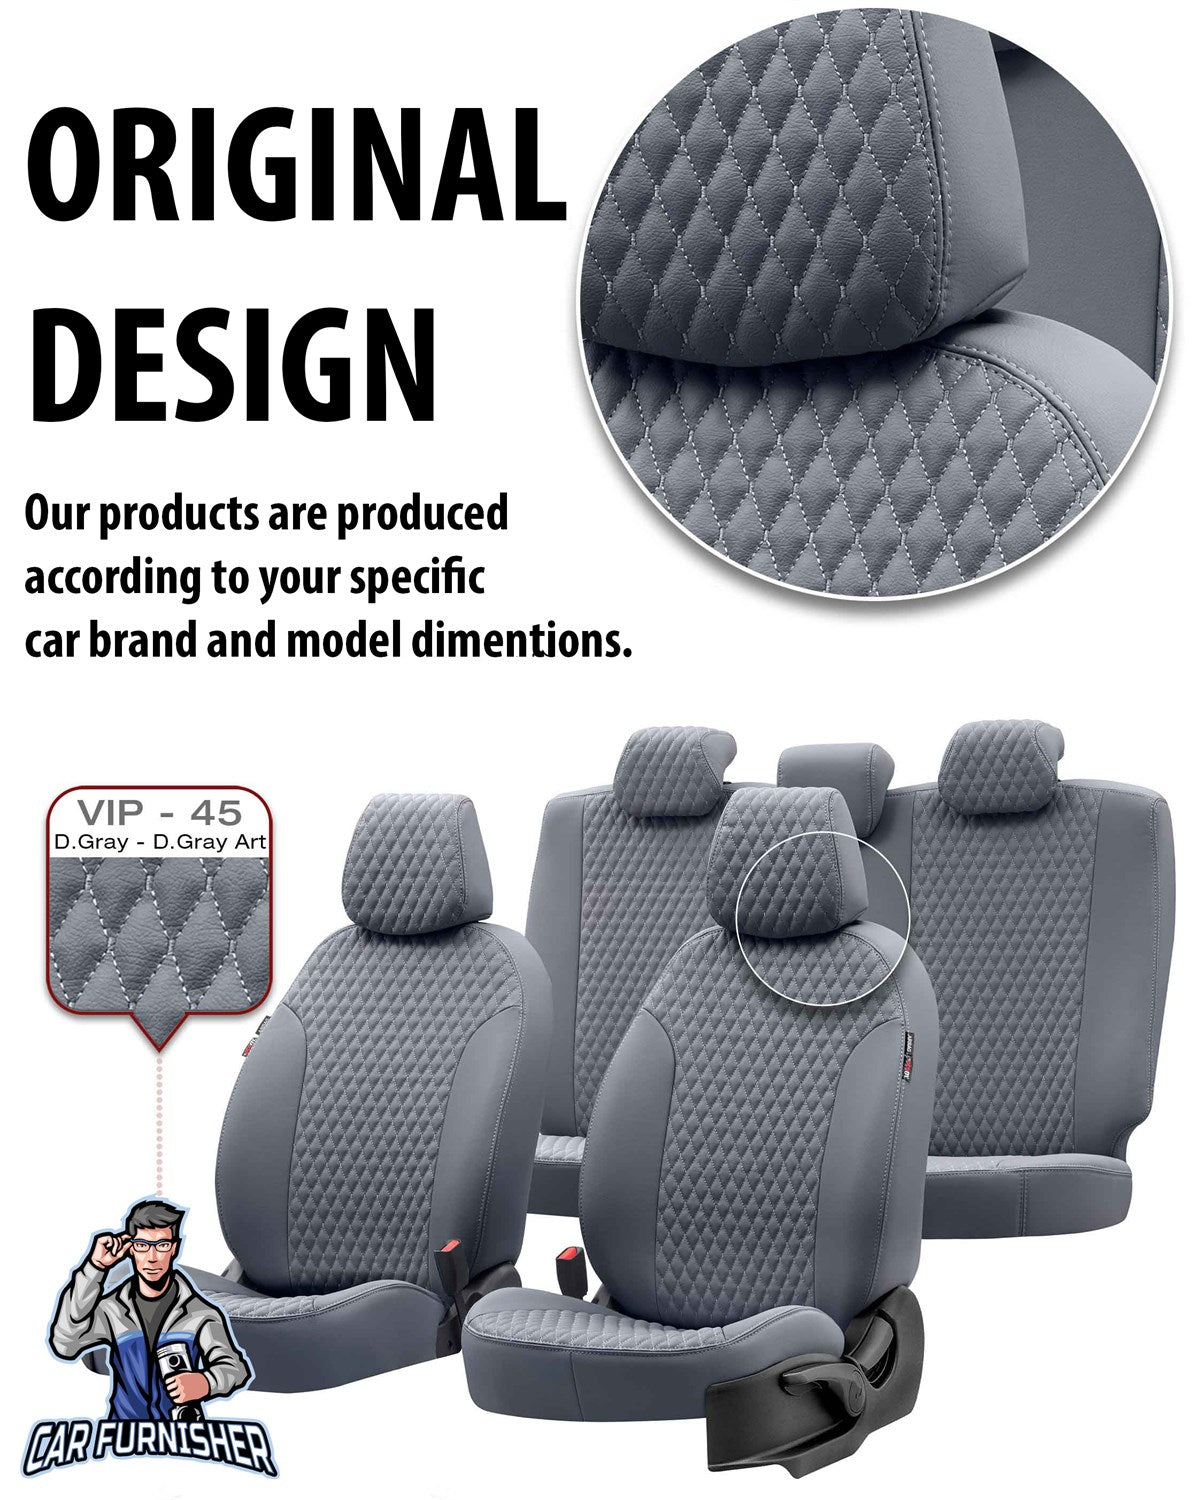 Seat Ateca Seat Covers Amsterdam Leather Design Black Leather